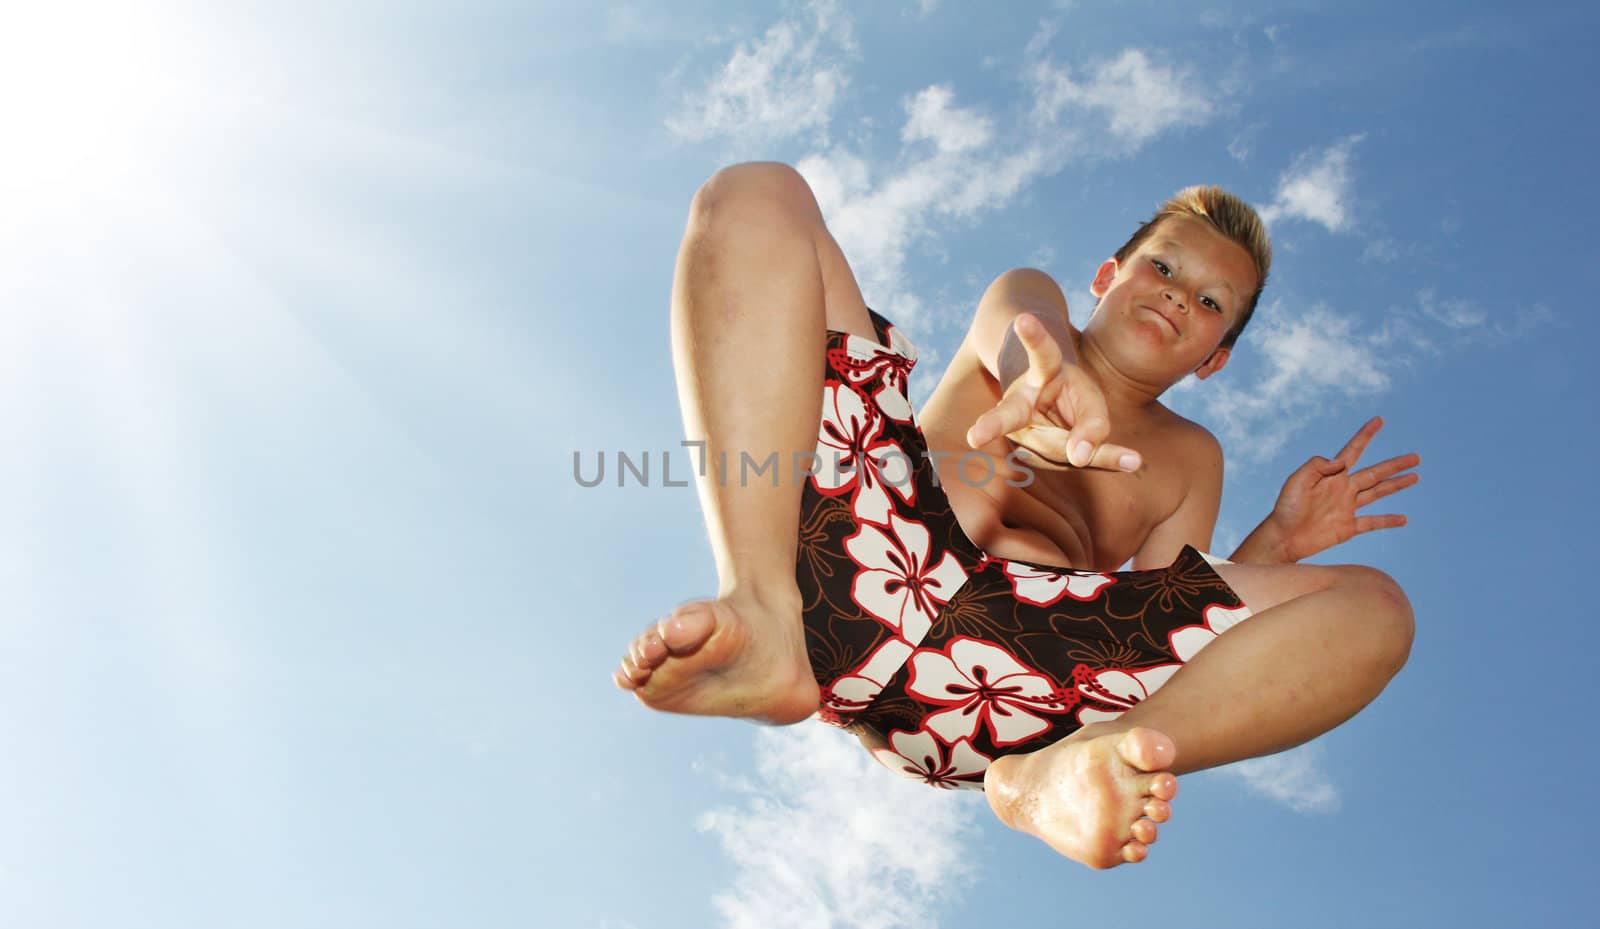 Little boy is jumping in front of the sky showing victory sign